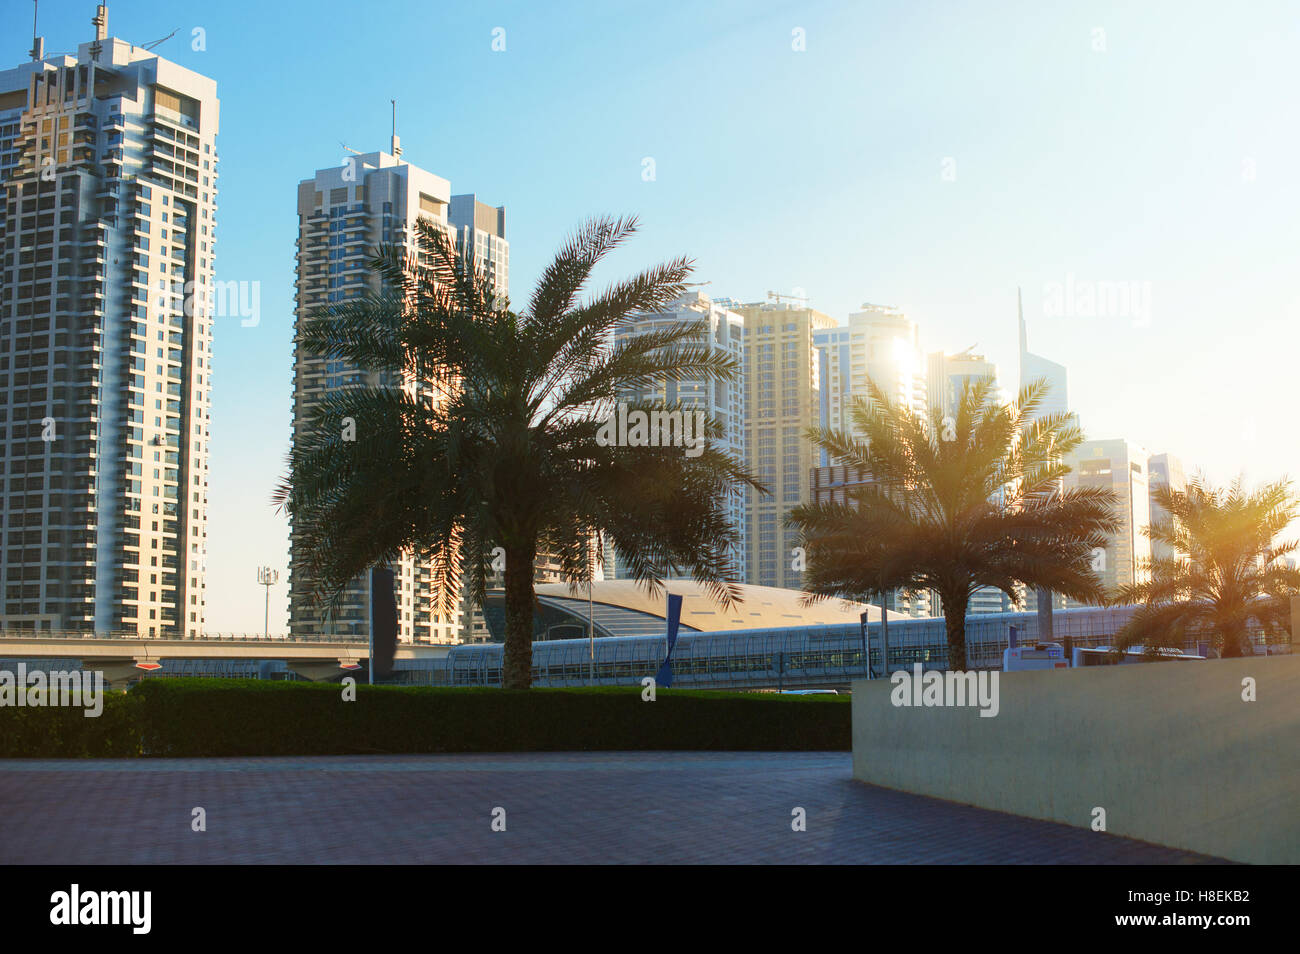 beautiful apartment buildings and palm trees in the city Stock Photo